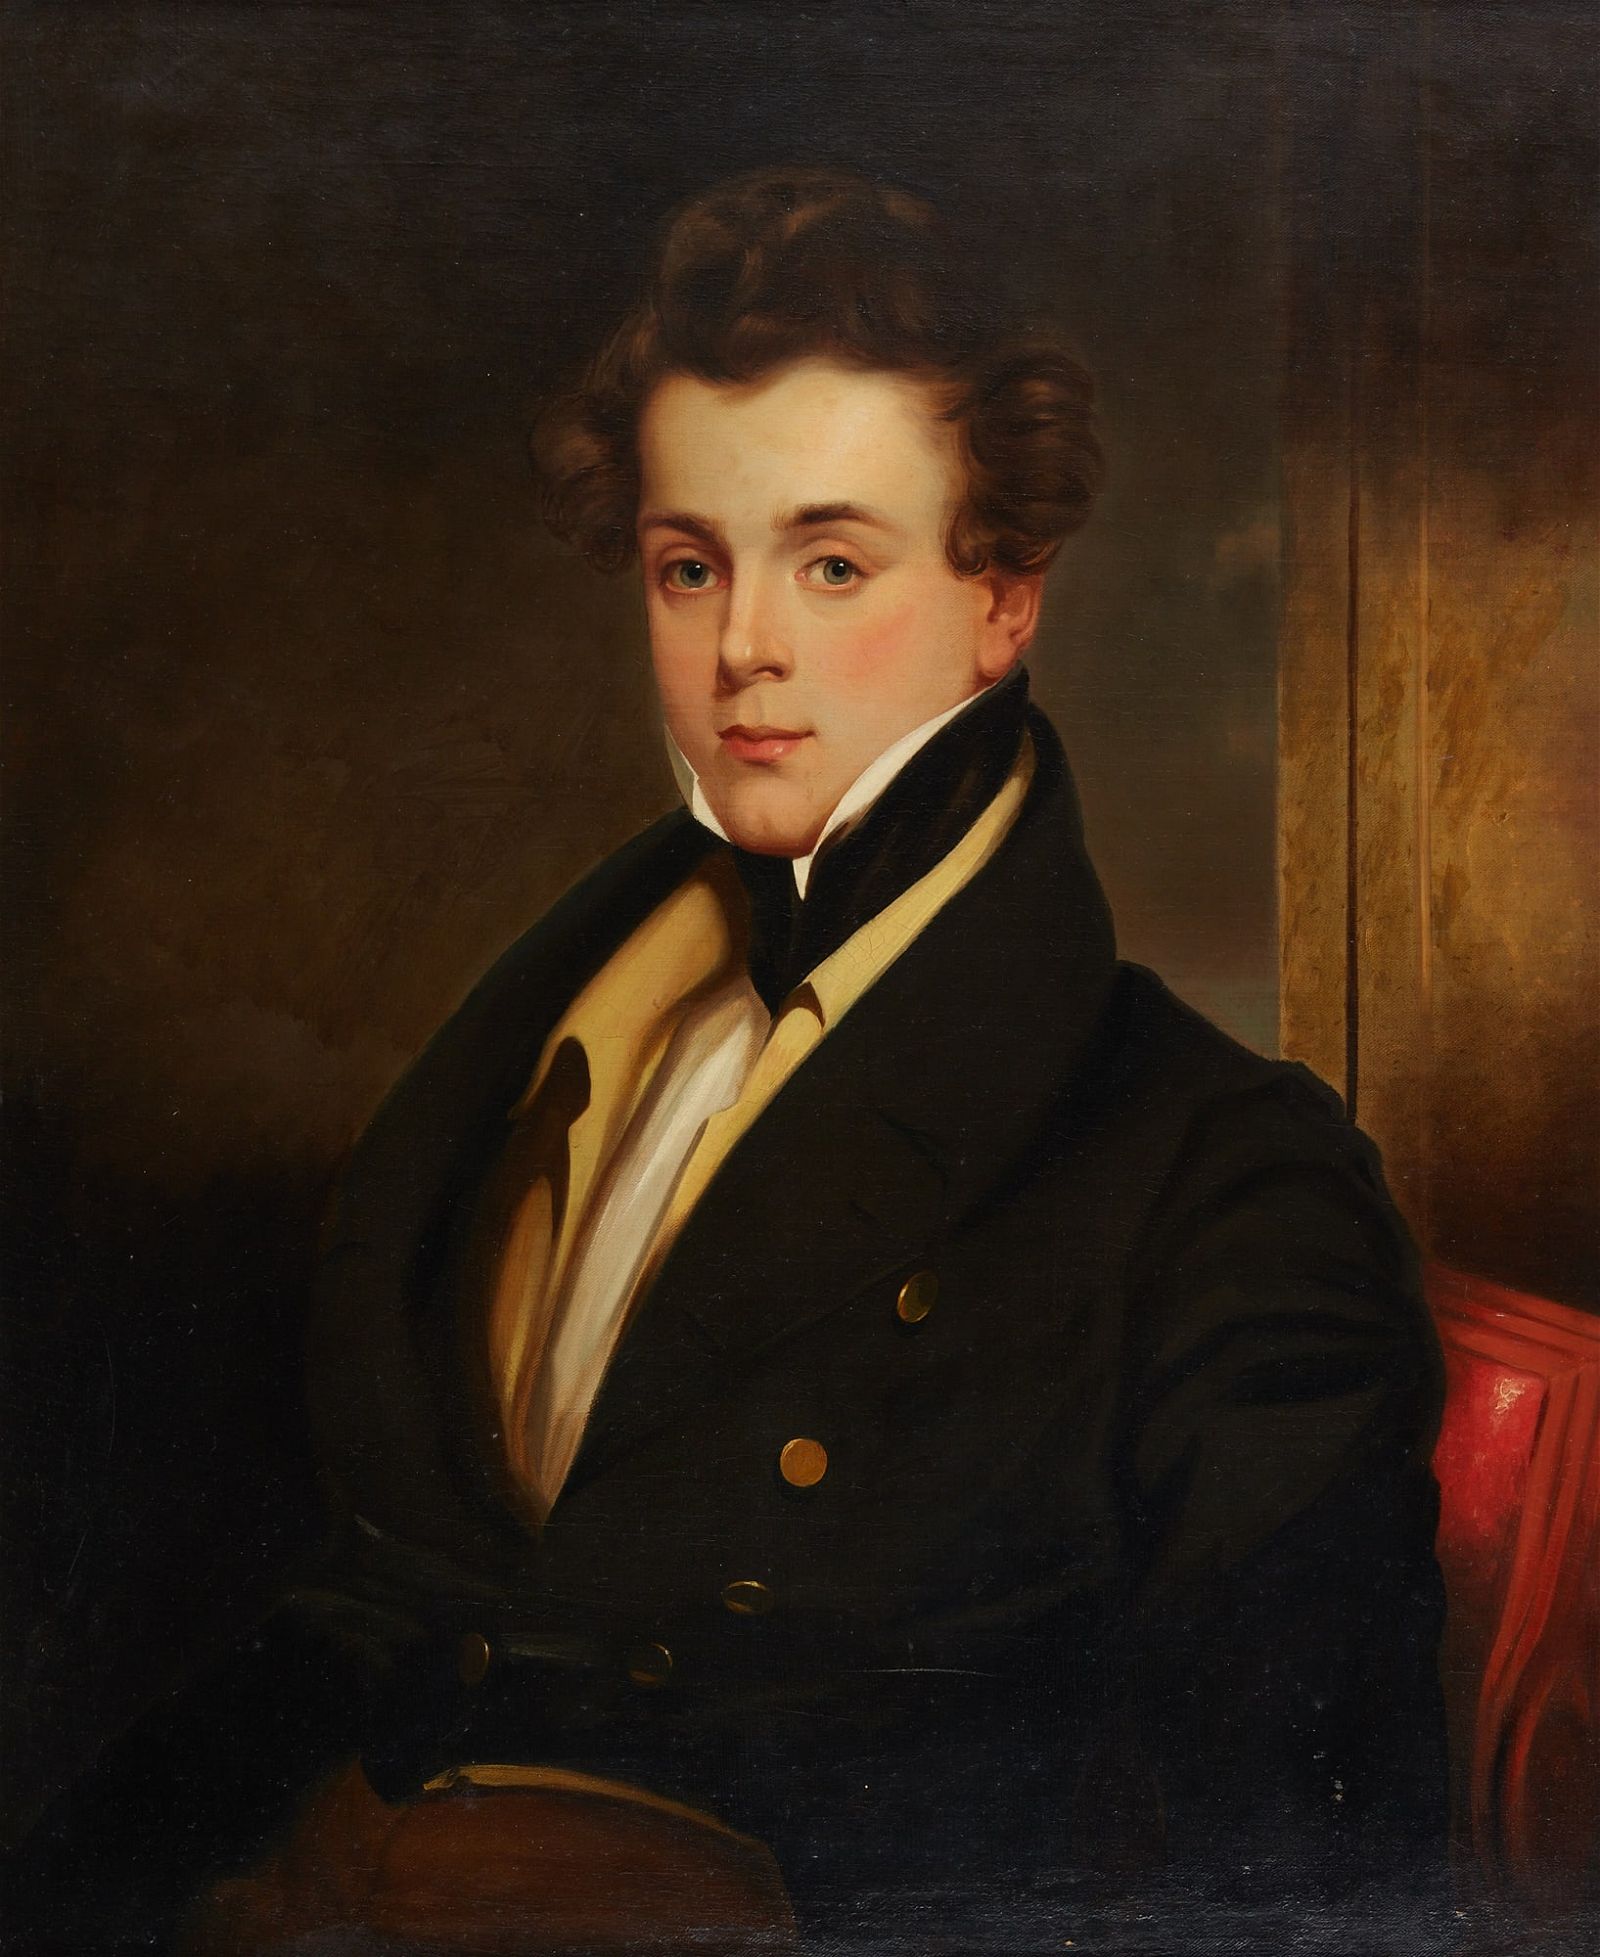 AMERICAN SCHOOL, PORTRAIT OF A YOUNG